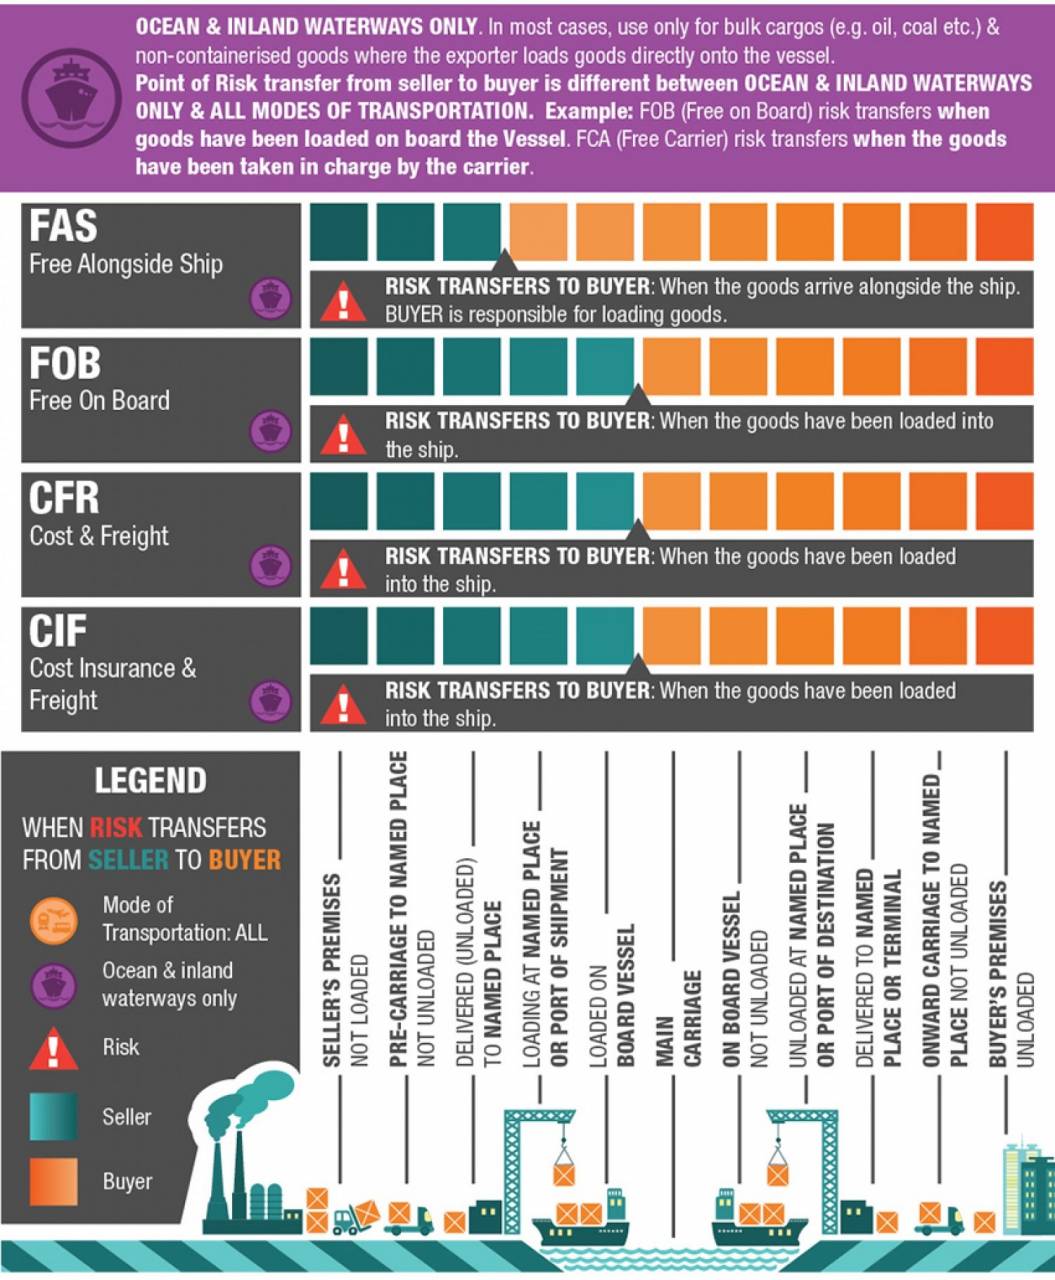 incoterms-infographic-risk-transfer-for-inland-waterways-and-shipping AOL